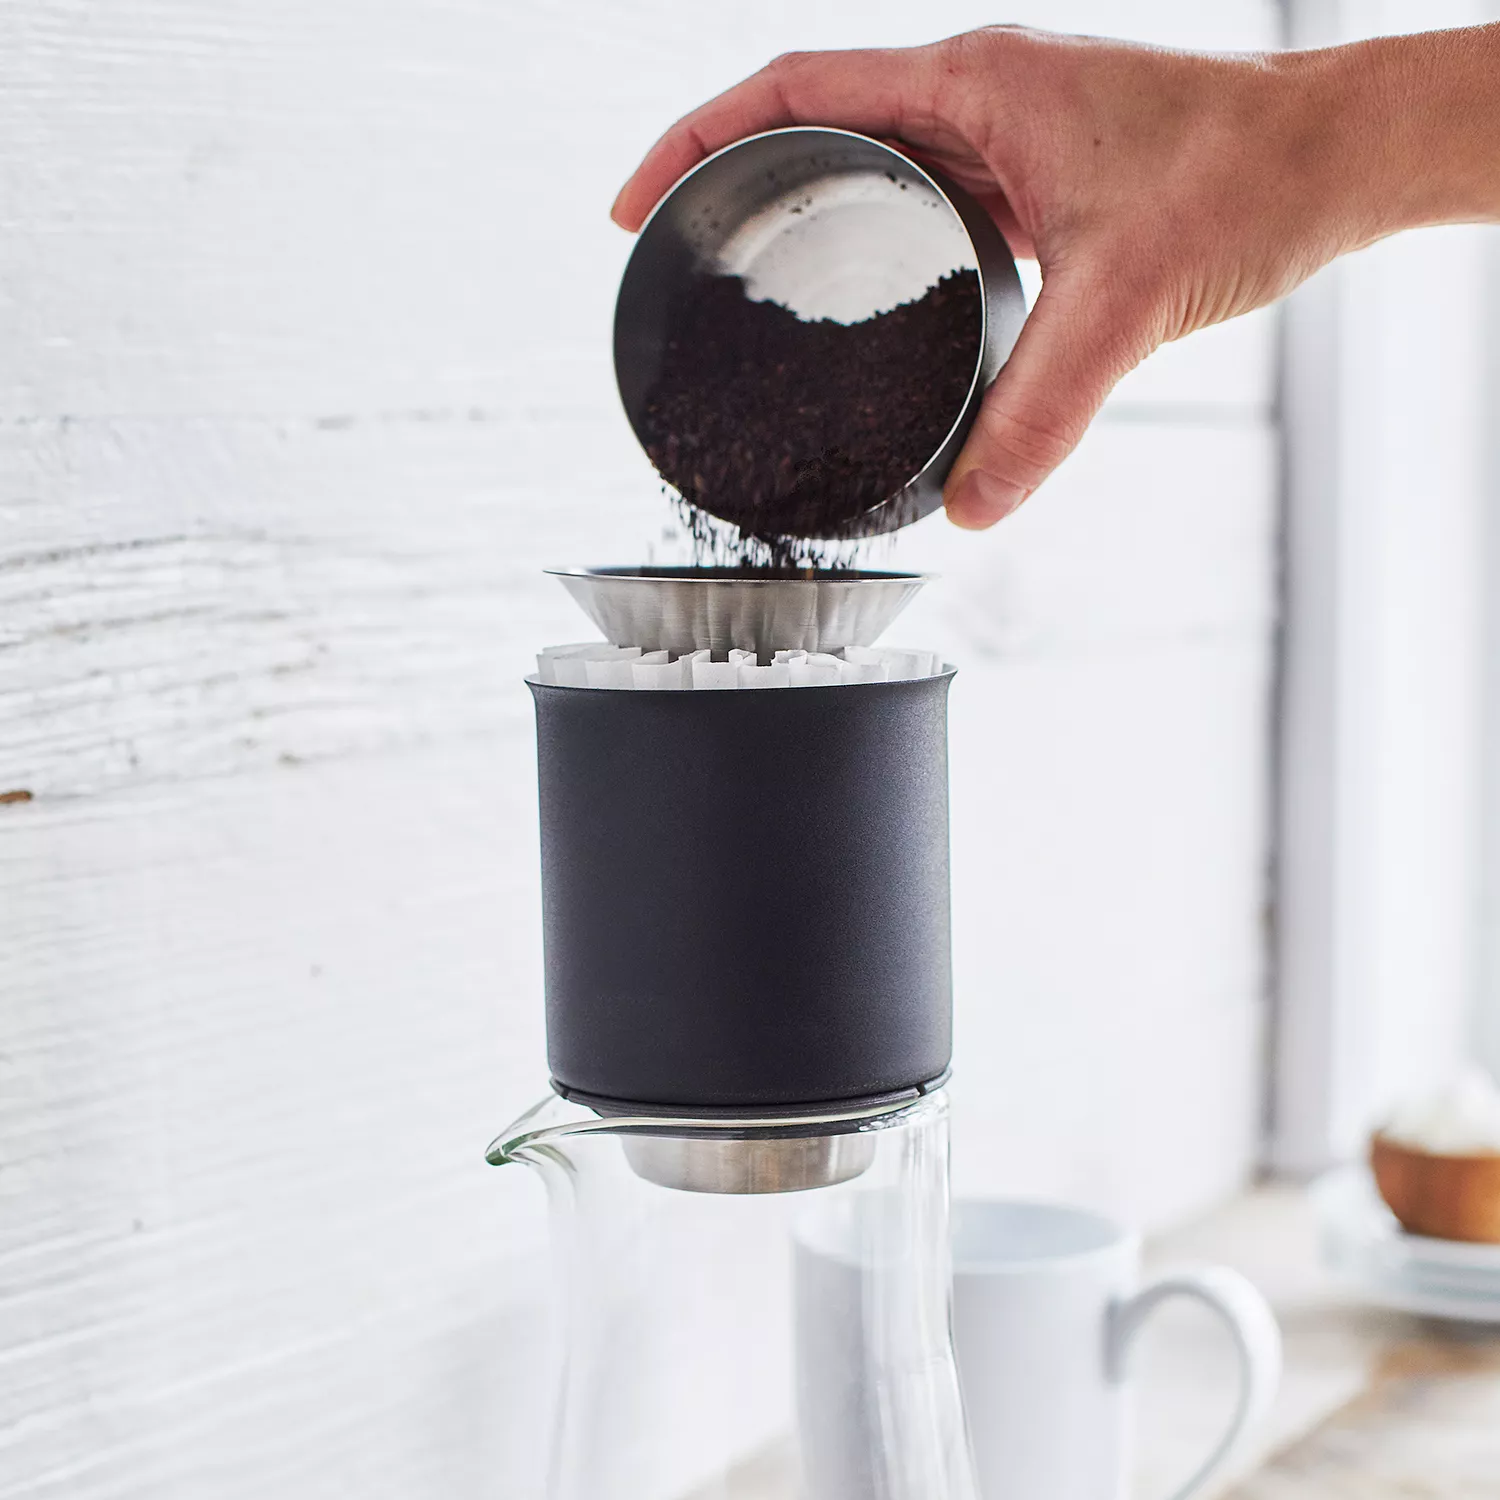 Stagg Pour-Over System: The Fill-Up Method 